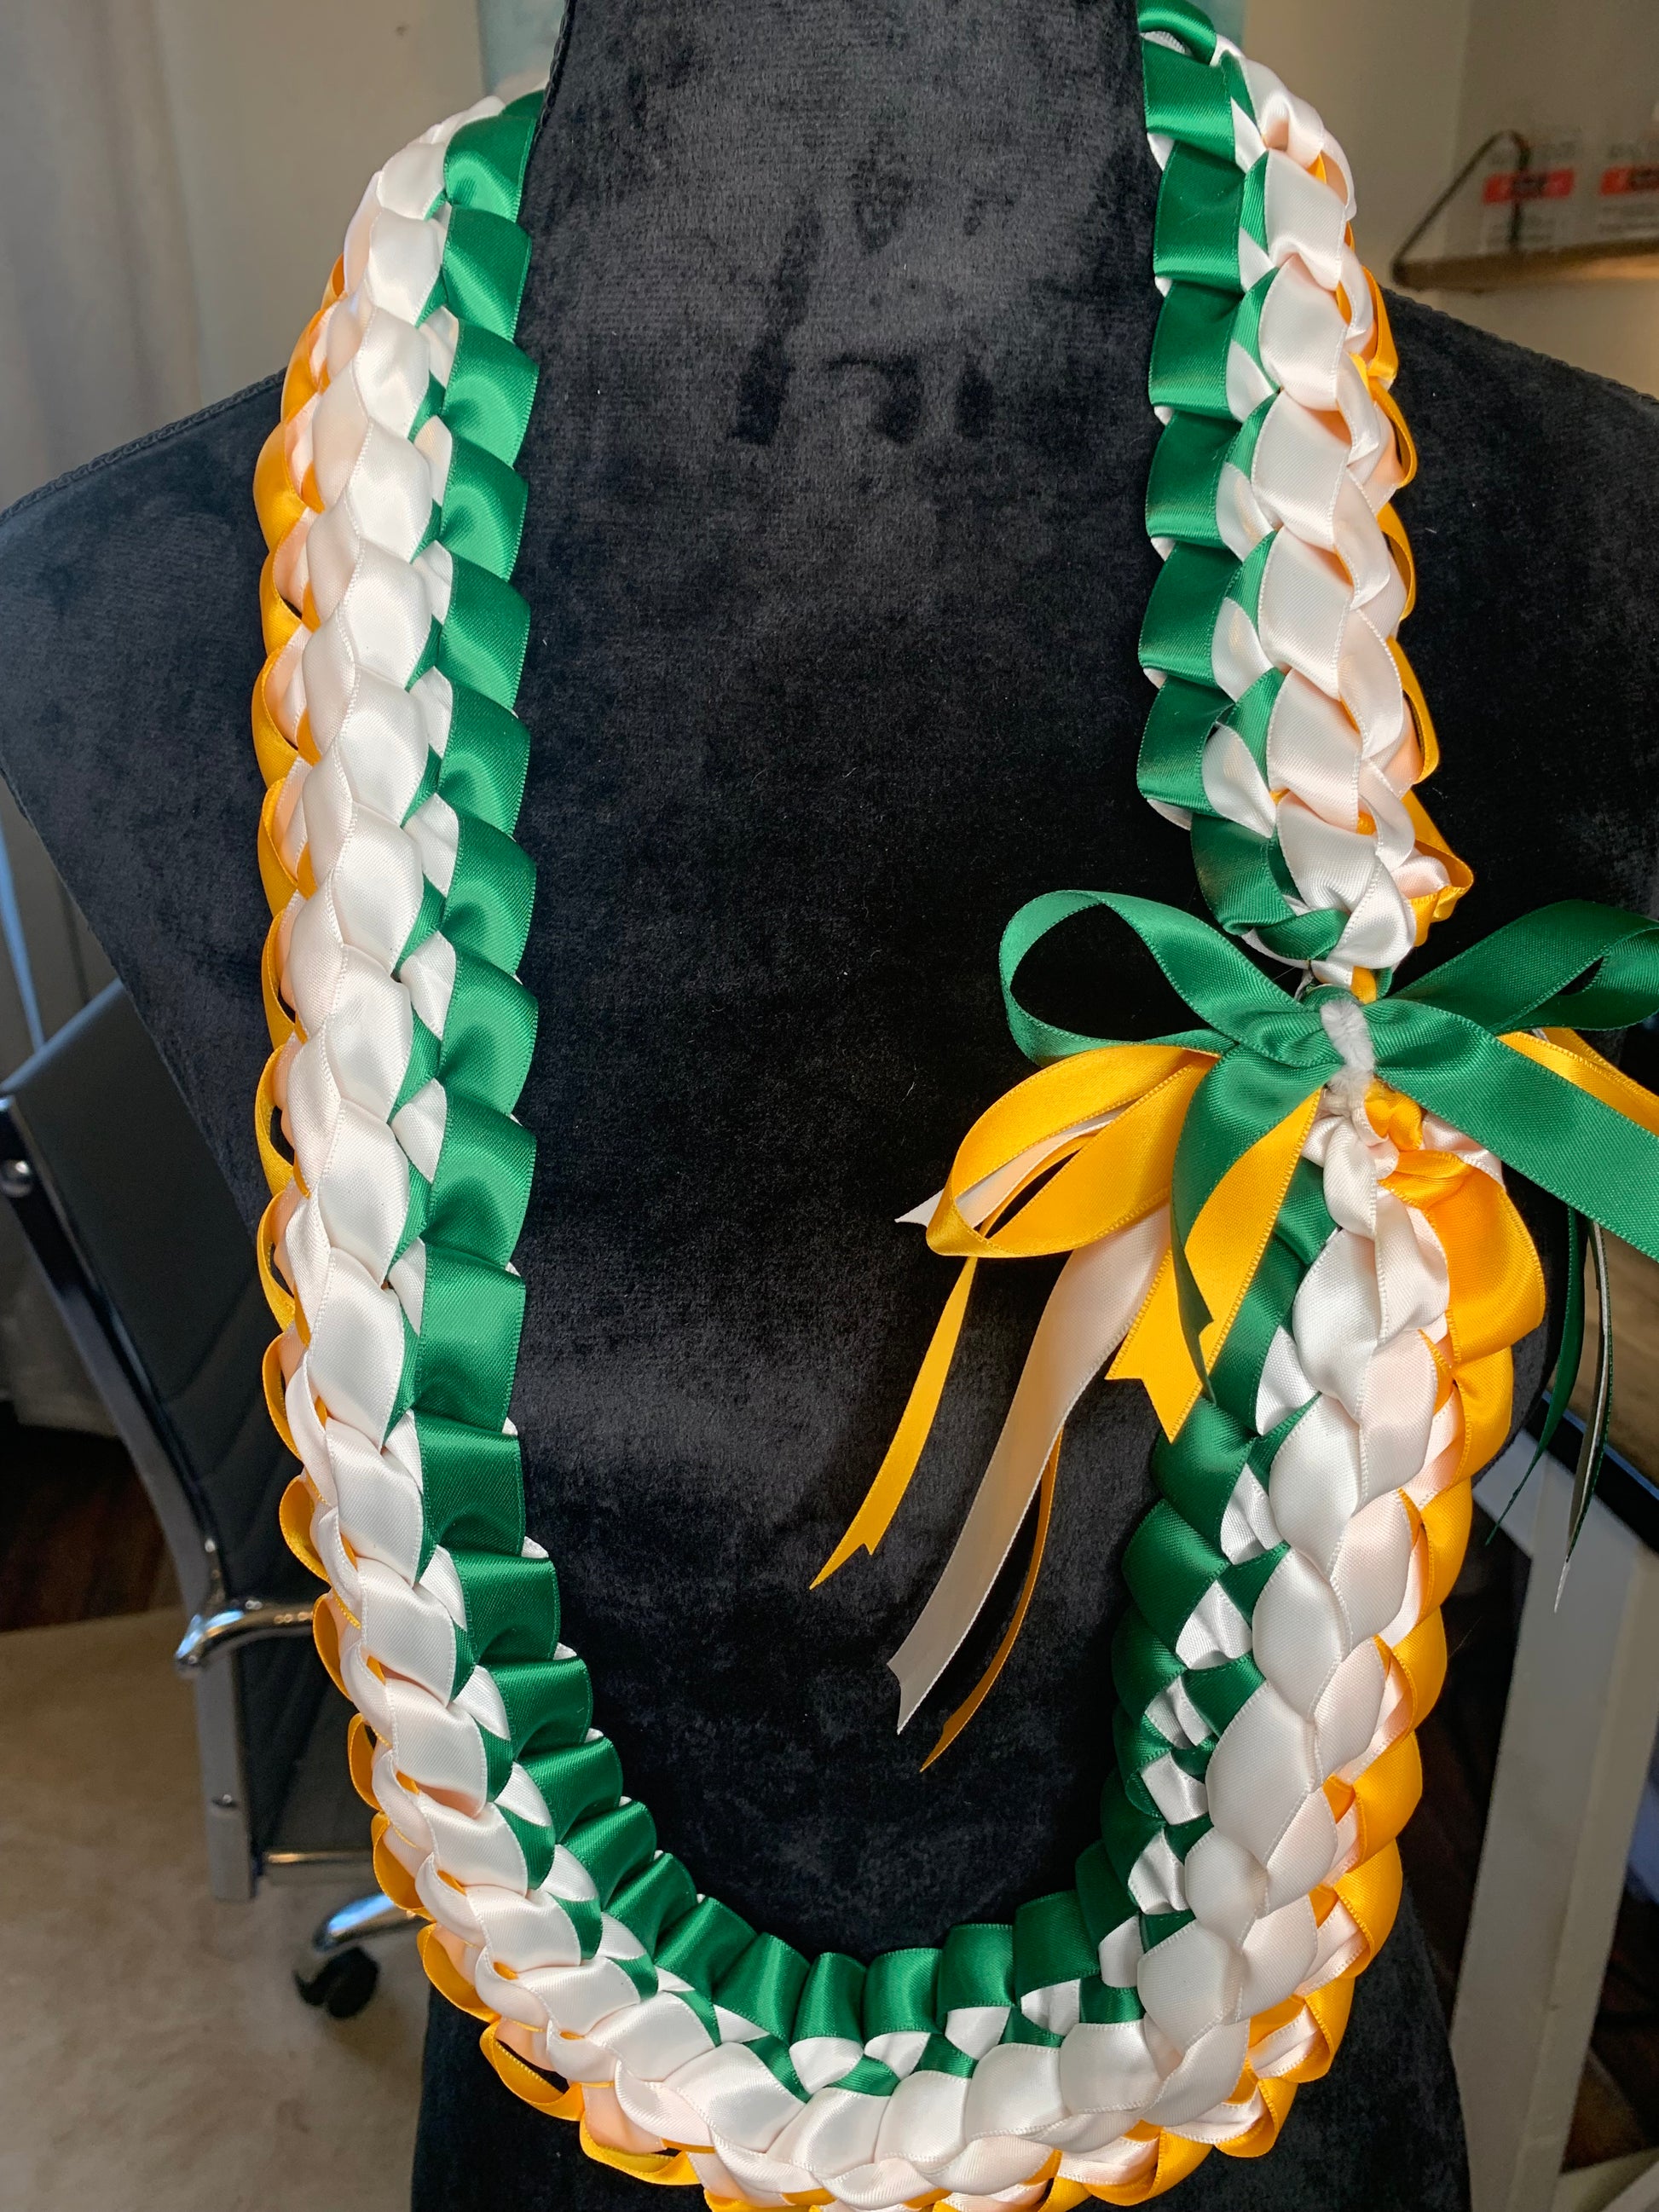 This Lei can be personalized to your liking. The listed price includes graduate year, name and a bow.  